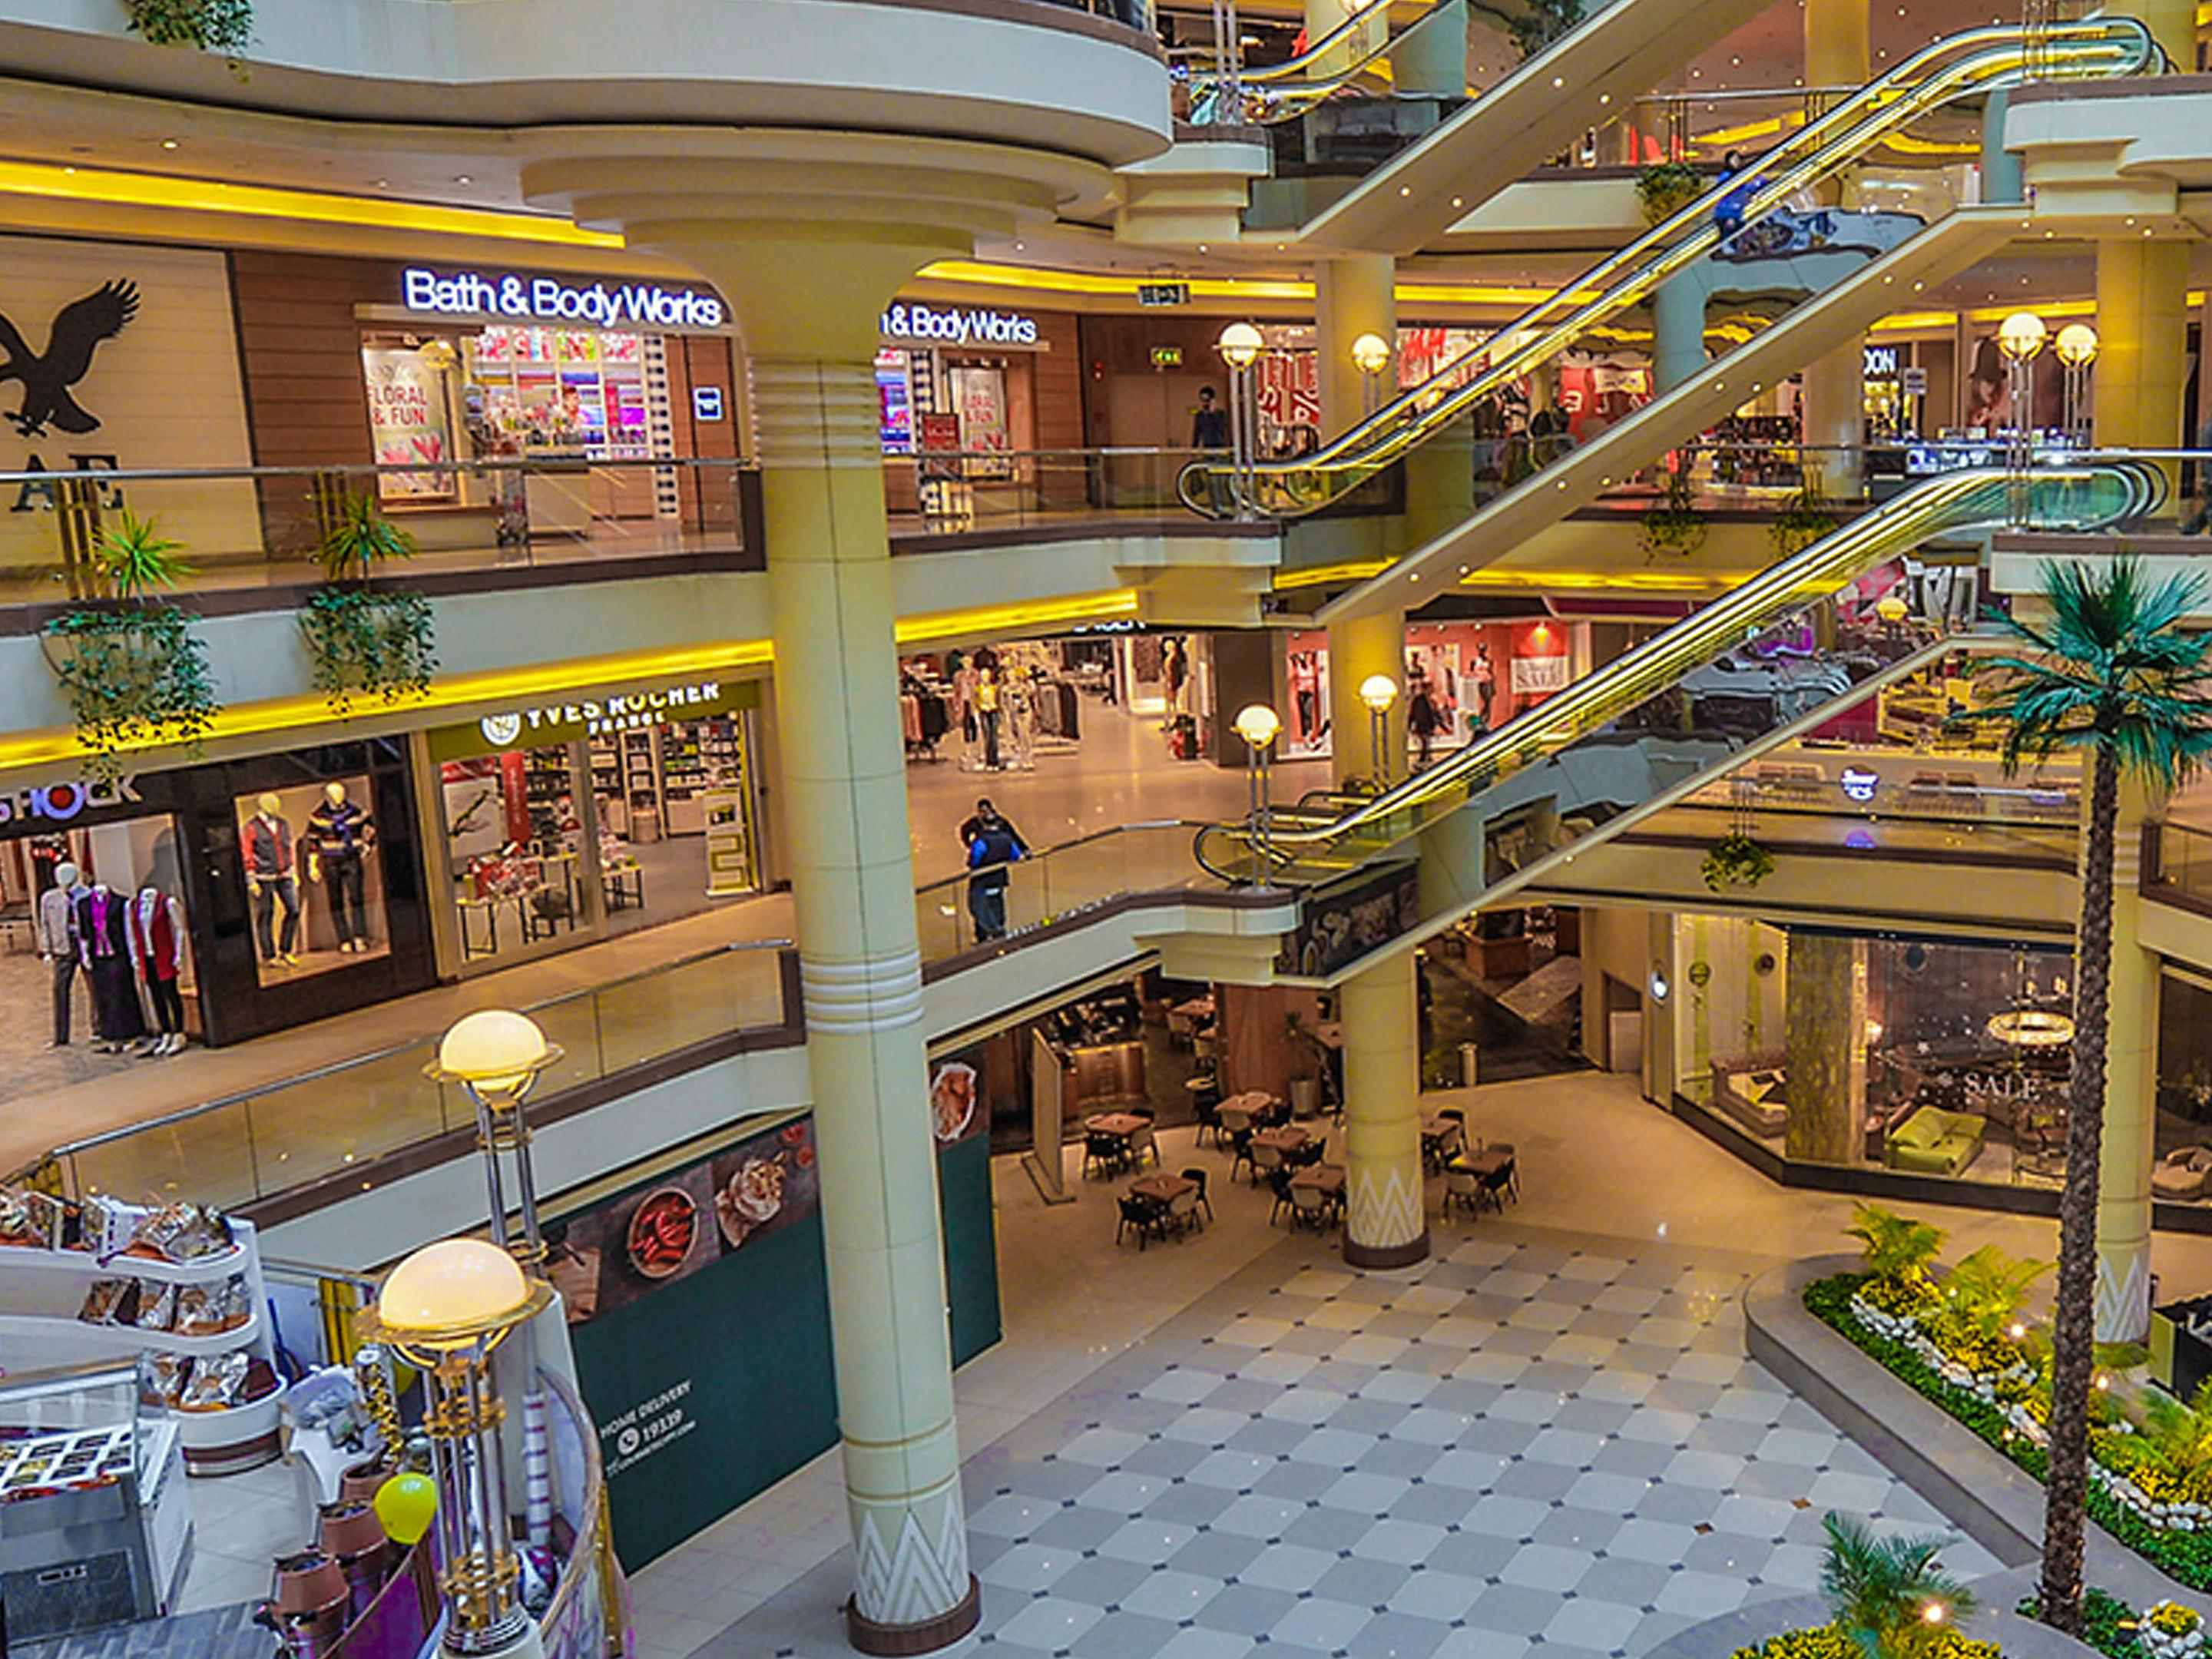 Adjacent Stars Centre shopping mall with over 640 stores